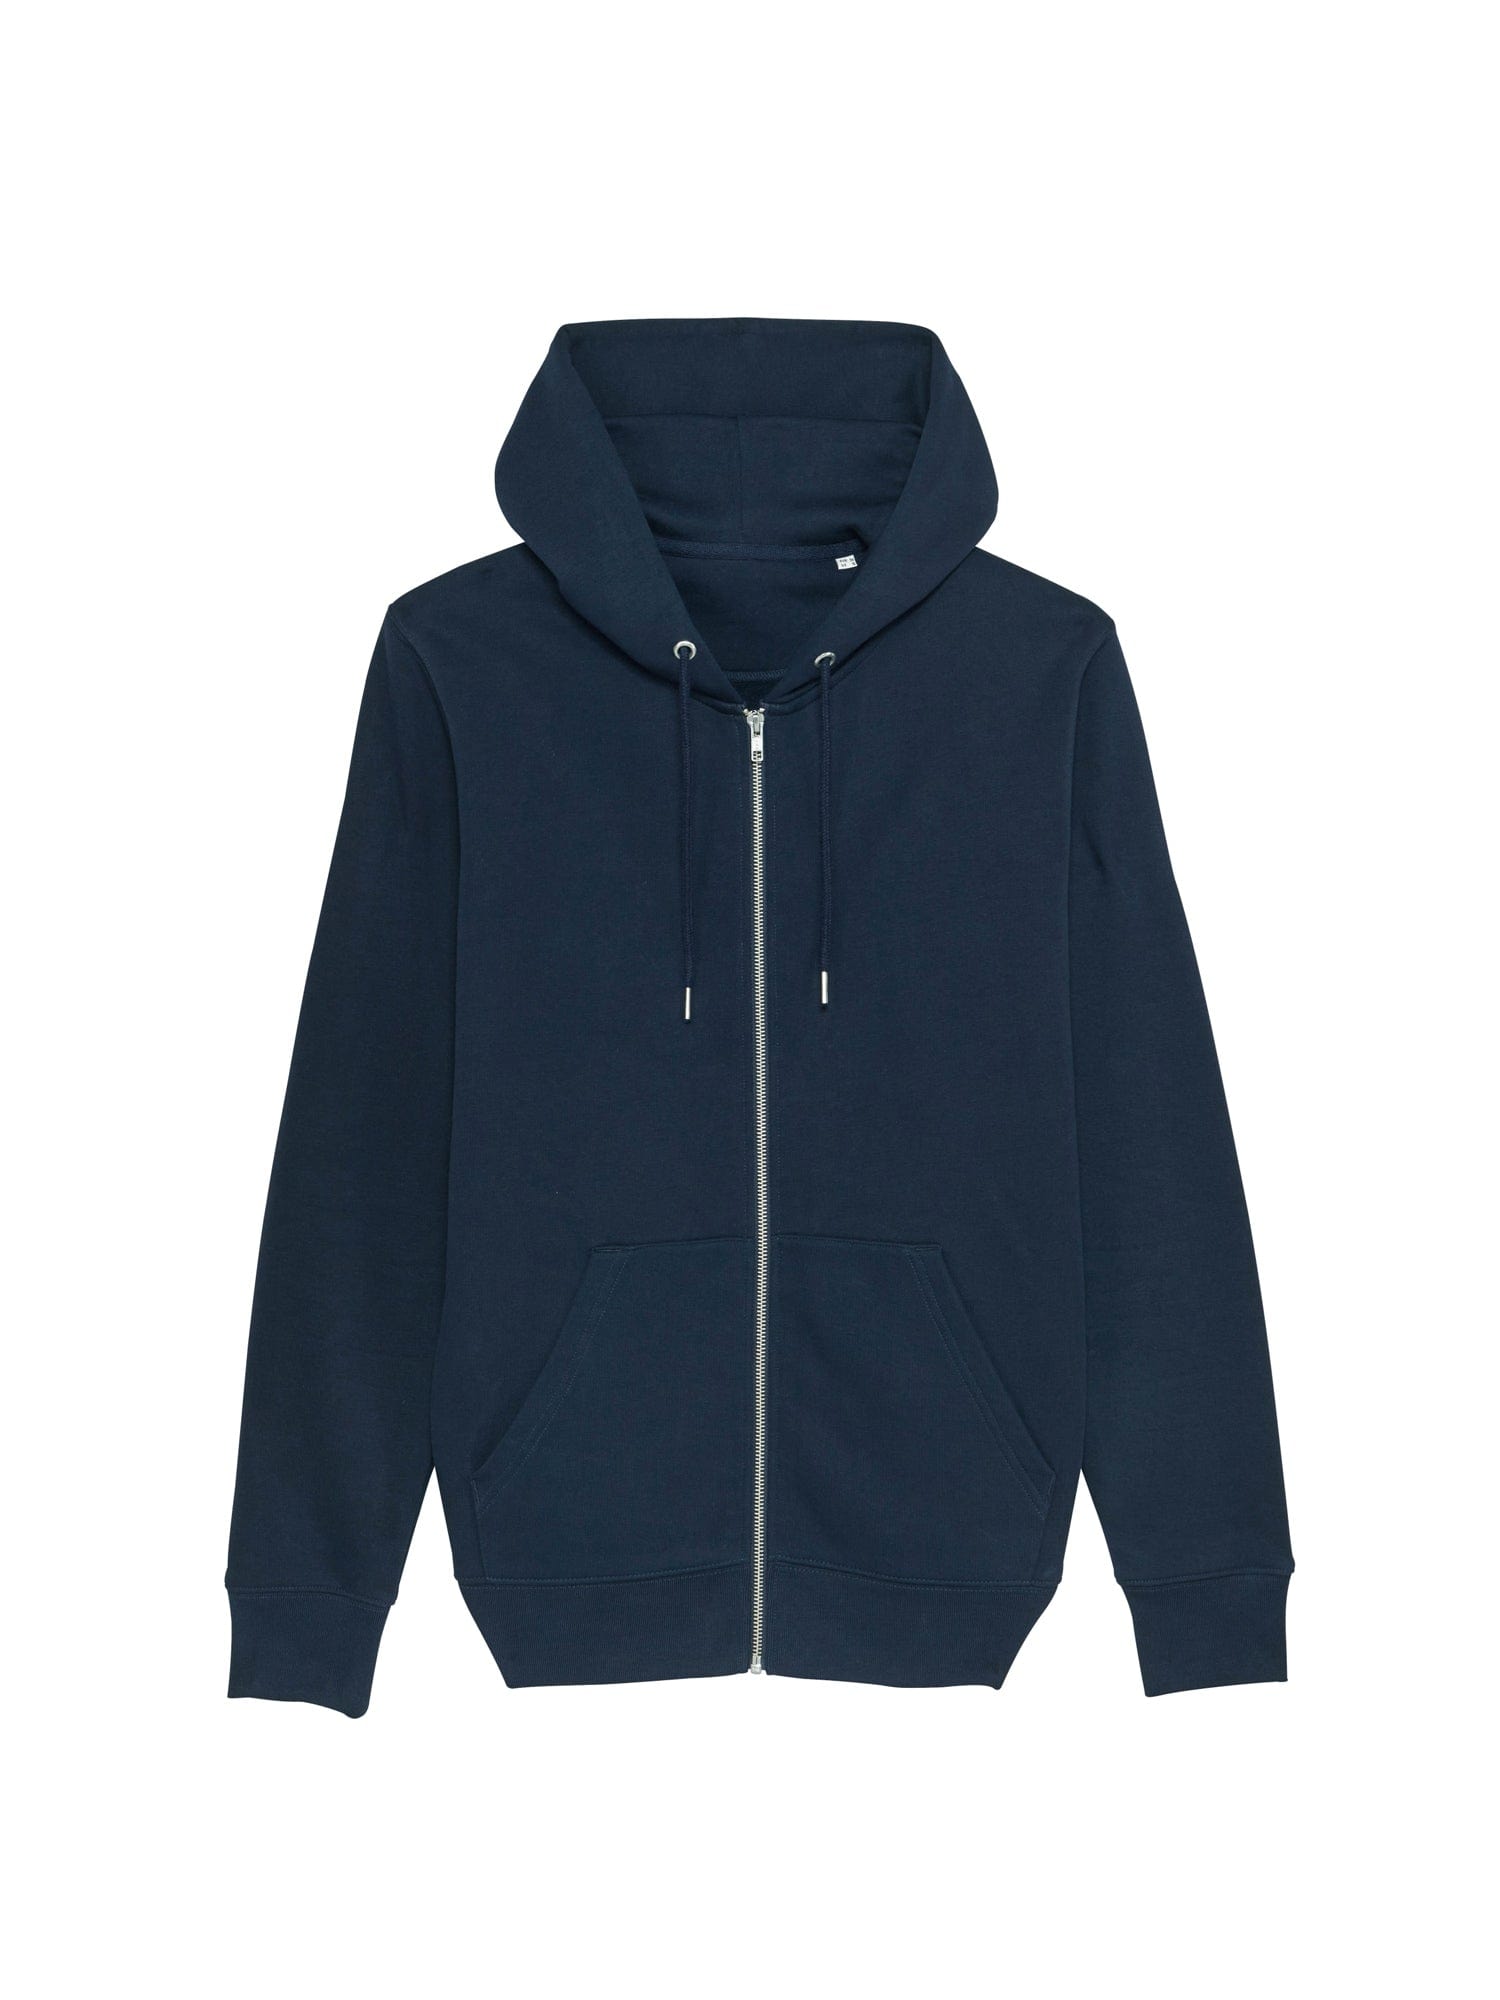 stanley stella organic zip up hoodie stsm566 portait french navy front flat lay